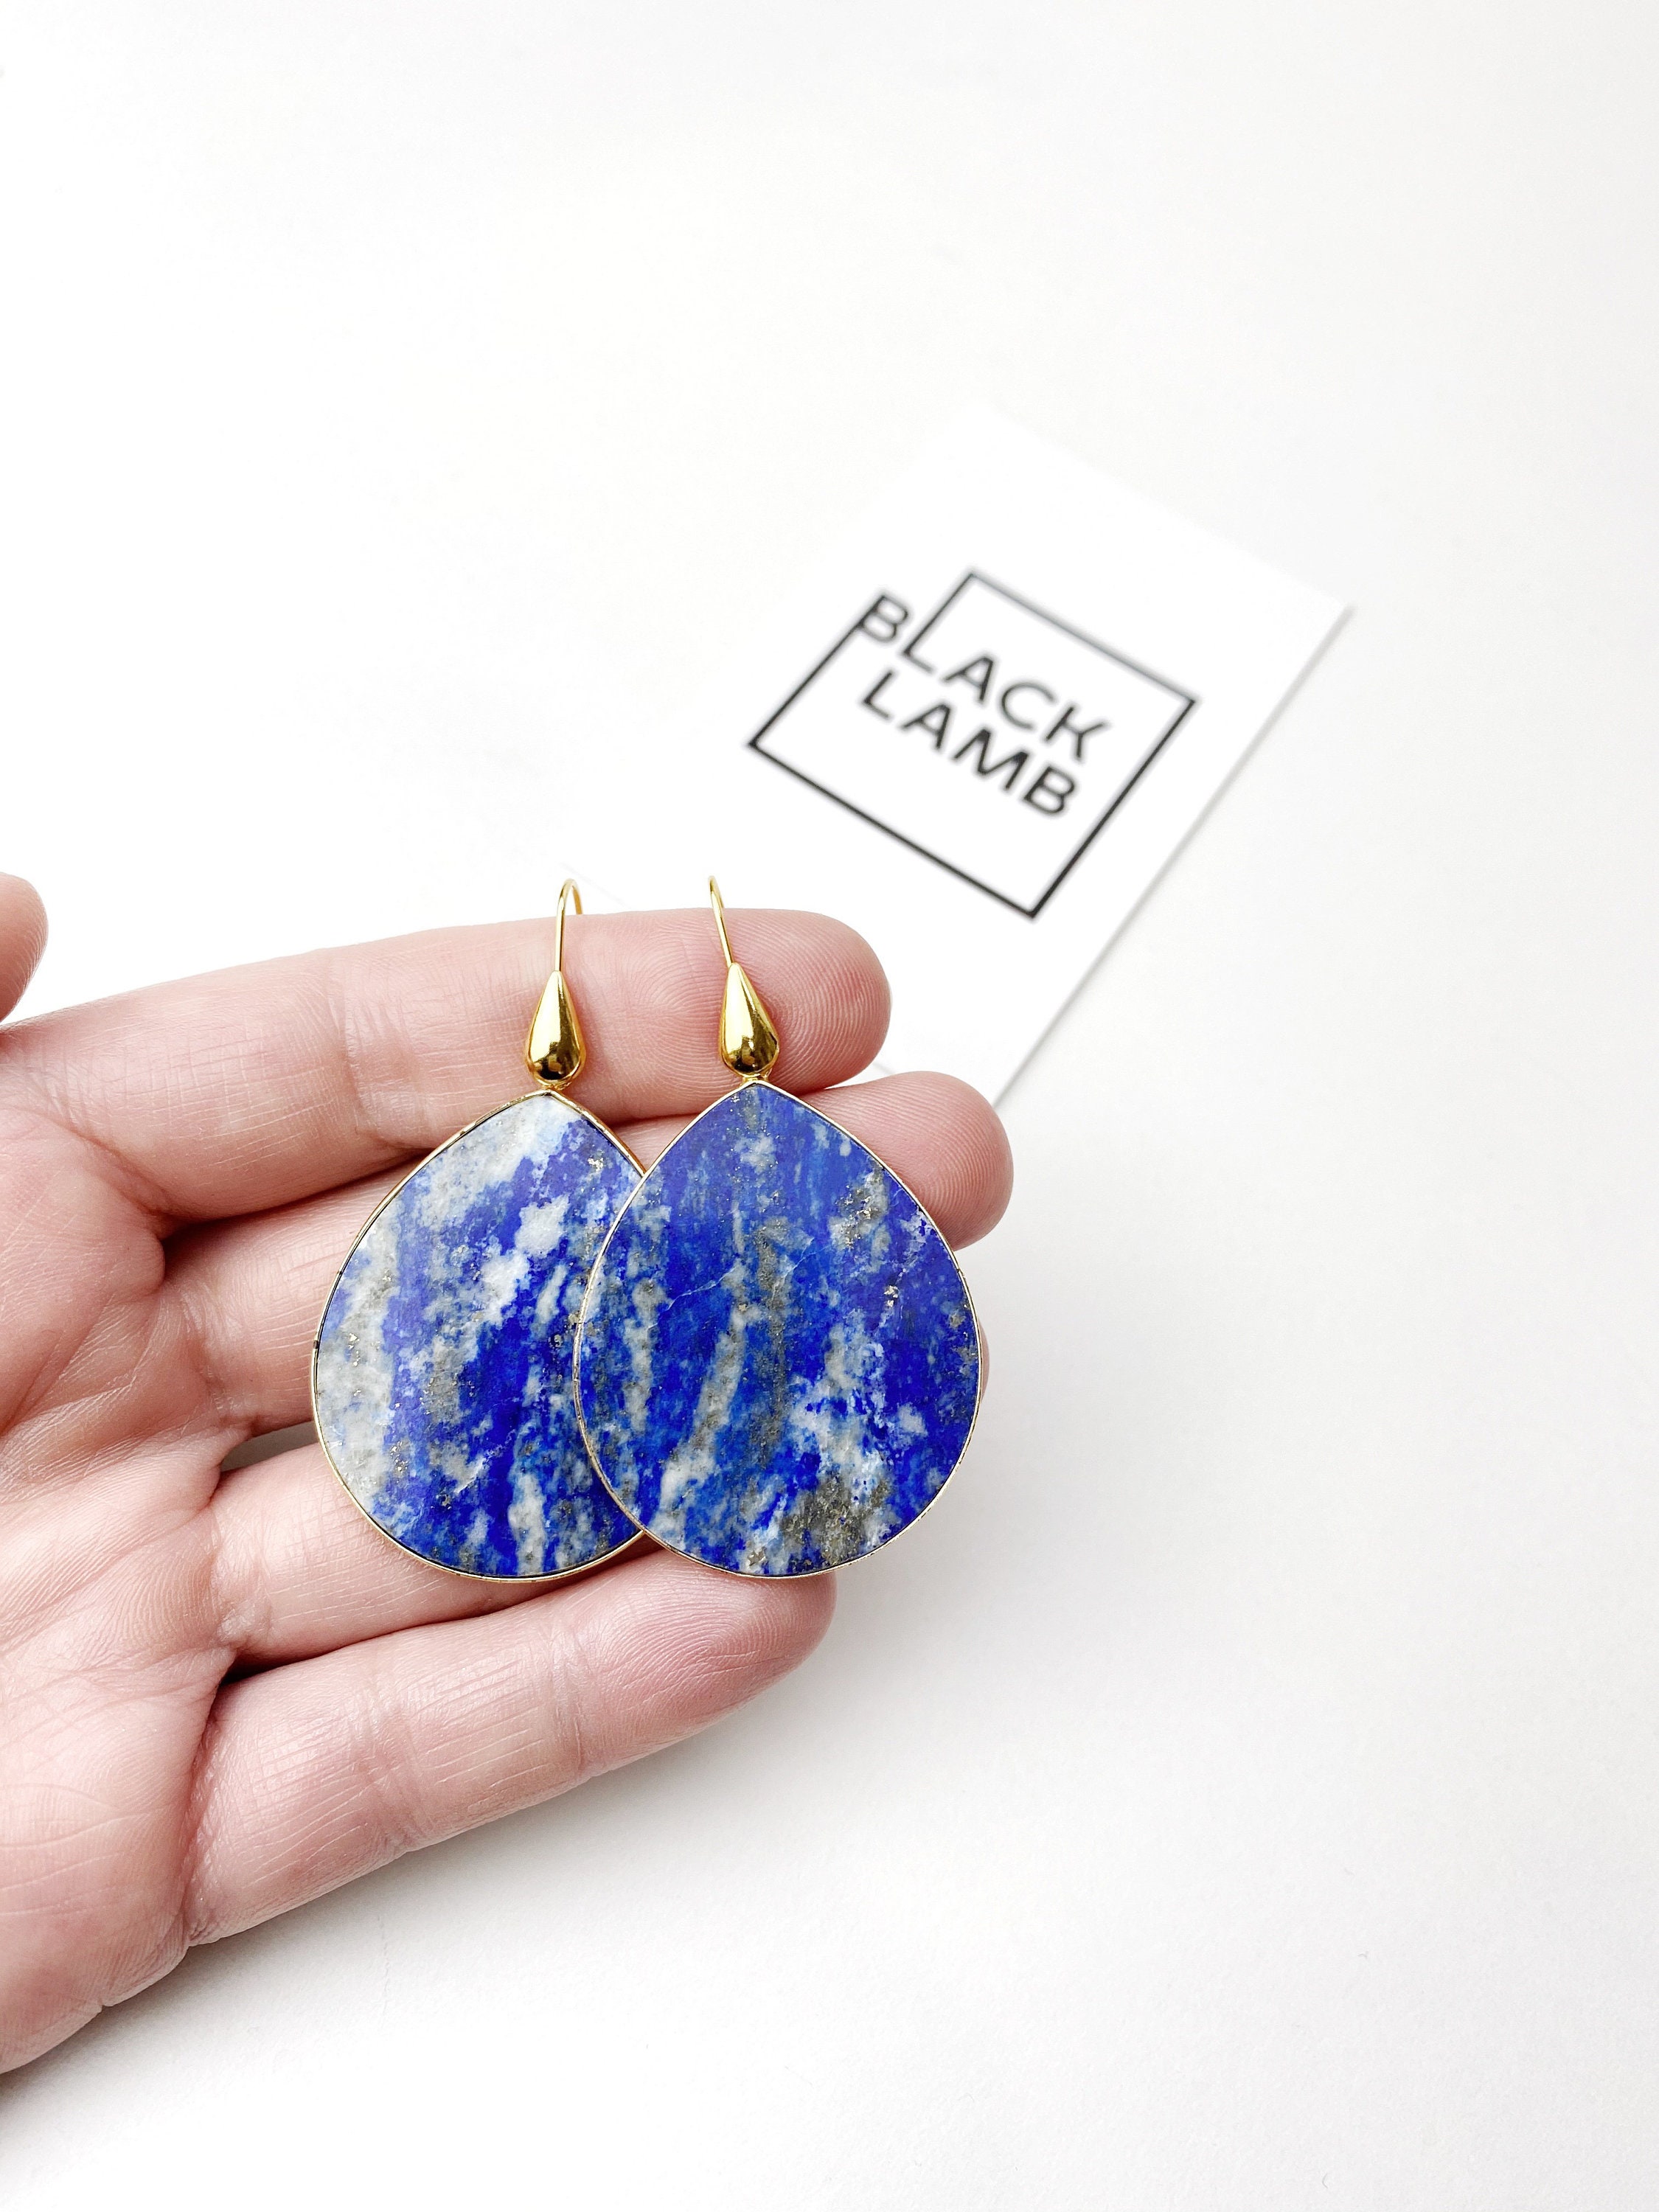 Blue Lapis Lazuli Teardrop Slice Drop Earrings Made in Melbourne. Lightweight.Free Shipping and gift wrapping